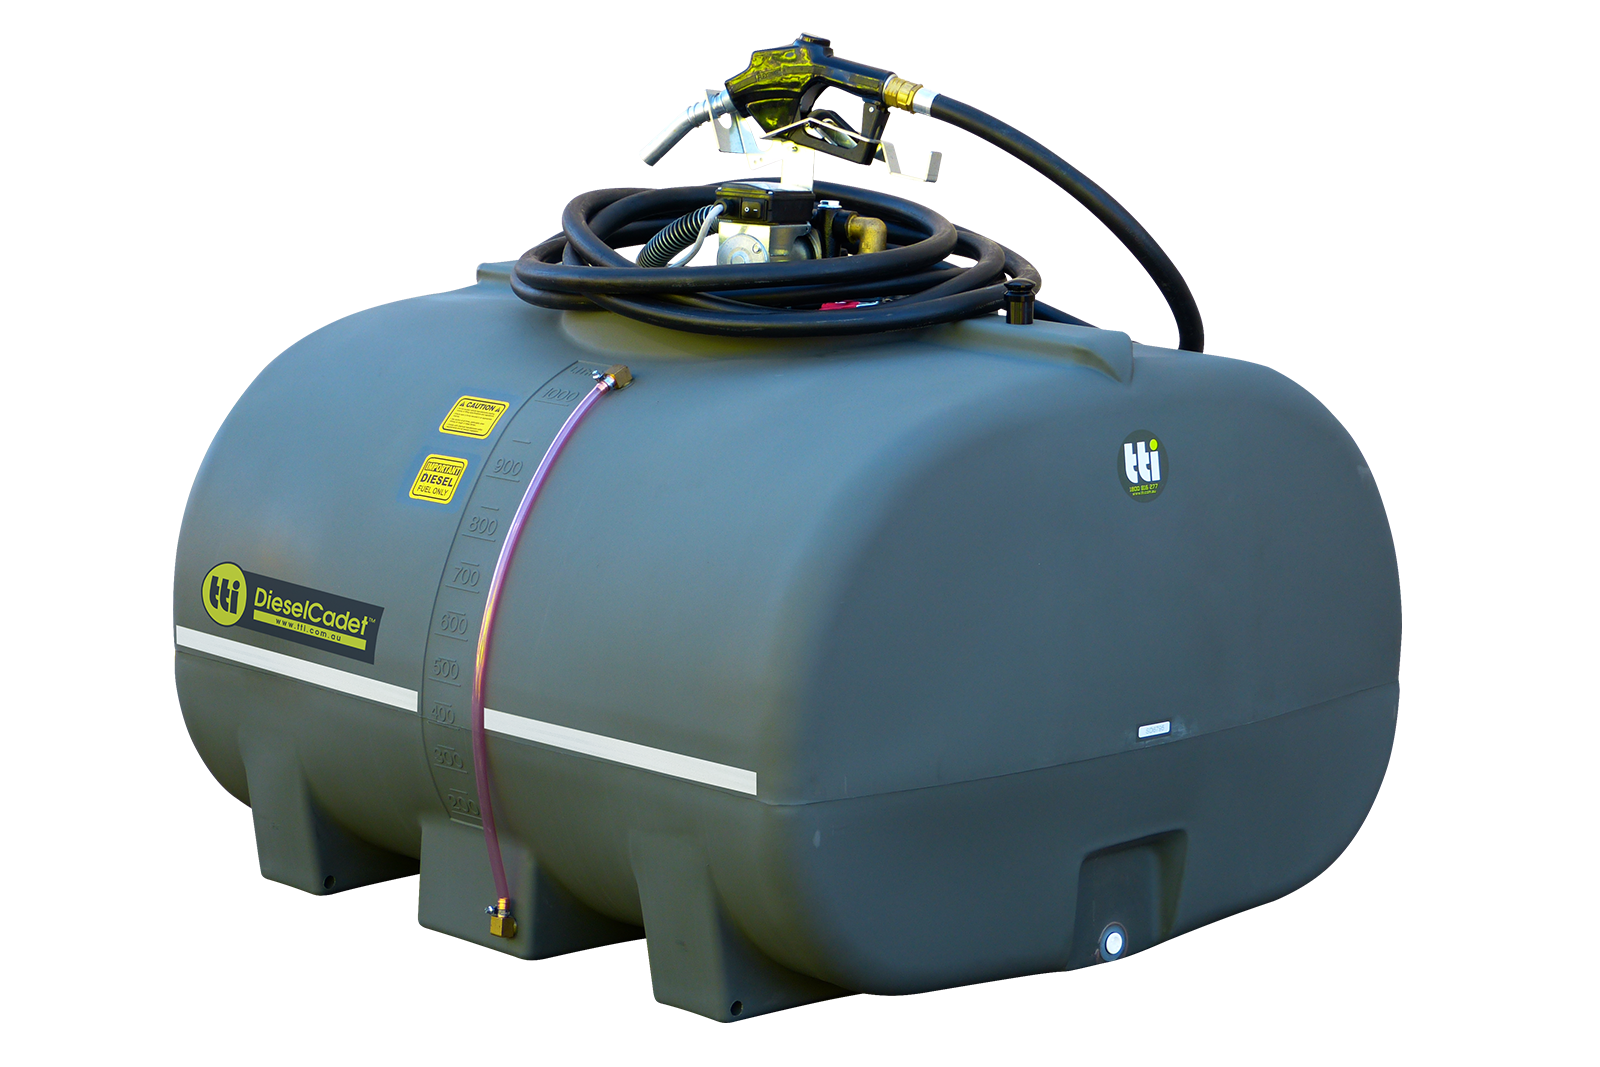 TIDY TANK LTD 1000L DIESEL FUEL STORAGE TANK WITH FILL-RITE 356PM 115V  ELECTRIC FUEL PUMP / - Able Auctions